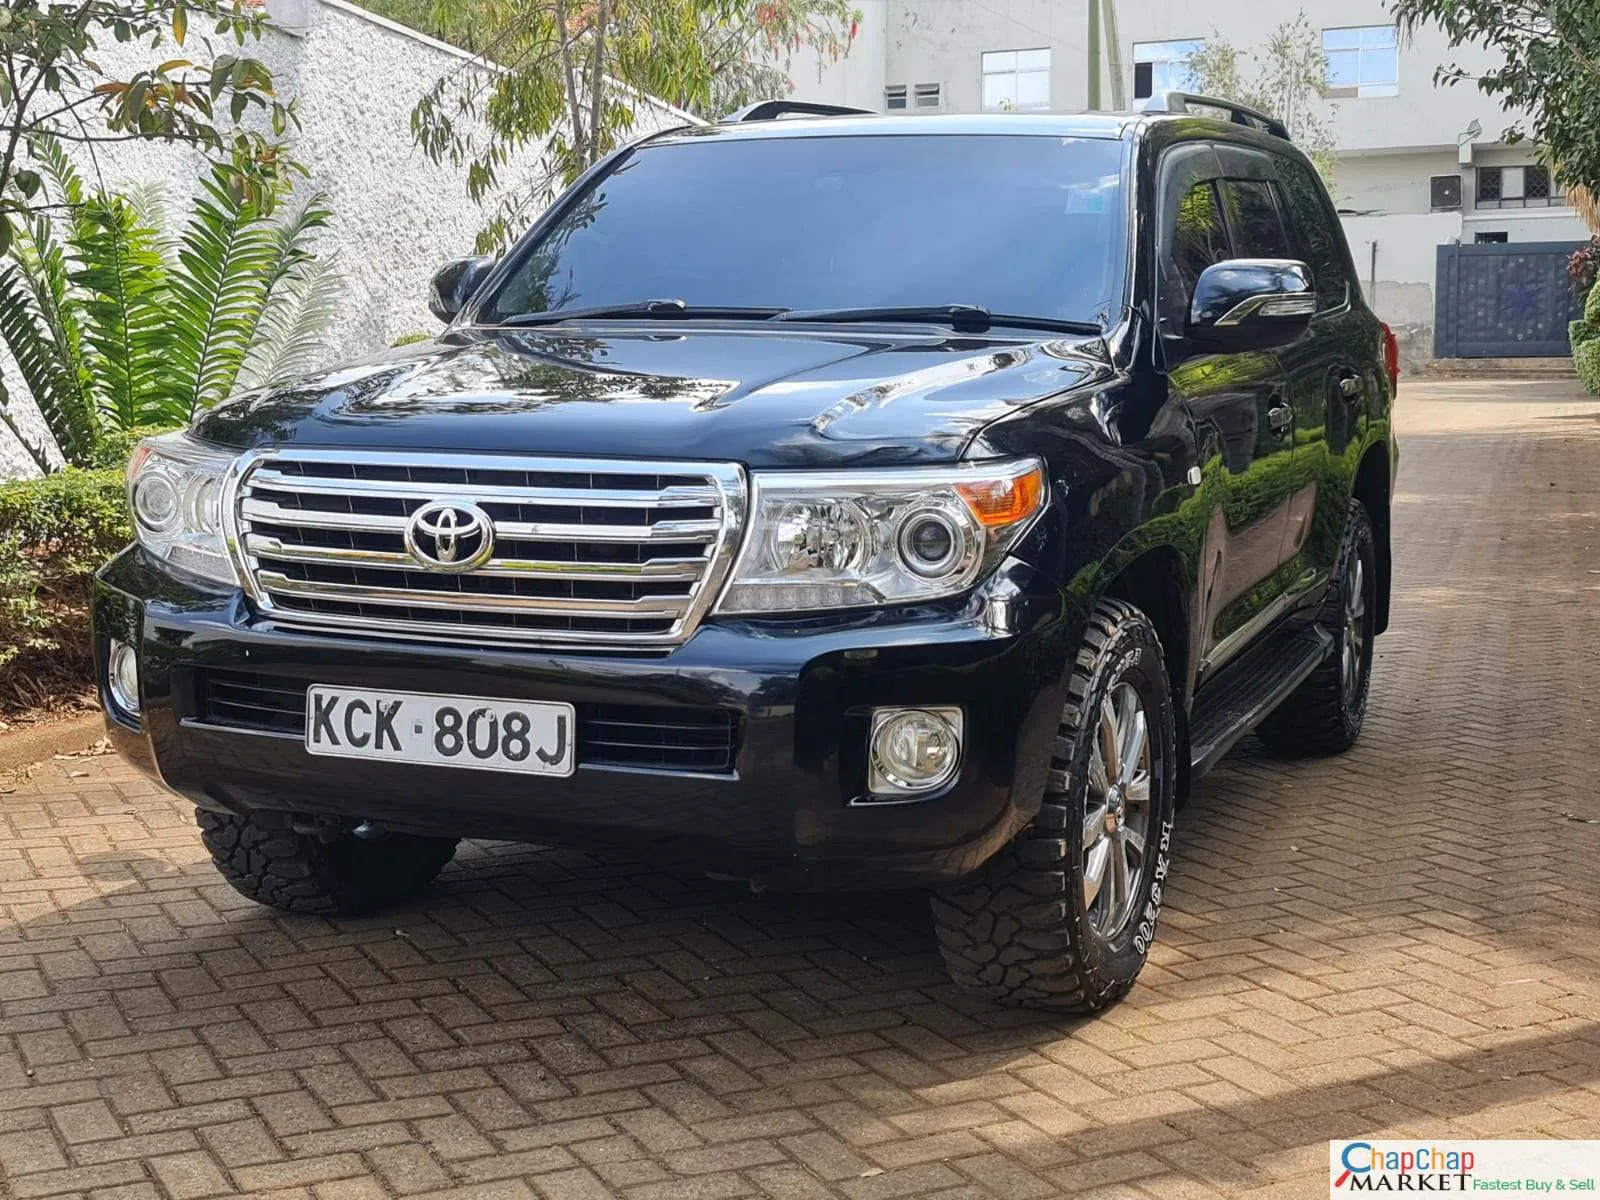 Cars Cars For Sale-Toyota Land cruiser V8 DIESEL 200 series SUNROOF TRADE IN OK EXCLUSIVE v8 for Sale in Kenya Hire purchase installments EXCLUSIVE 9